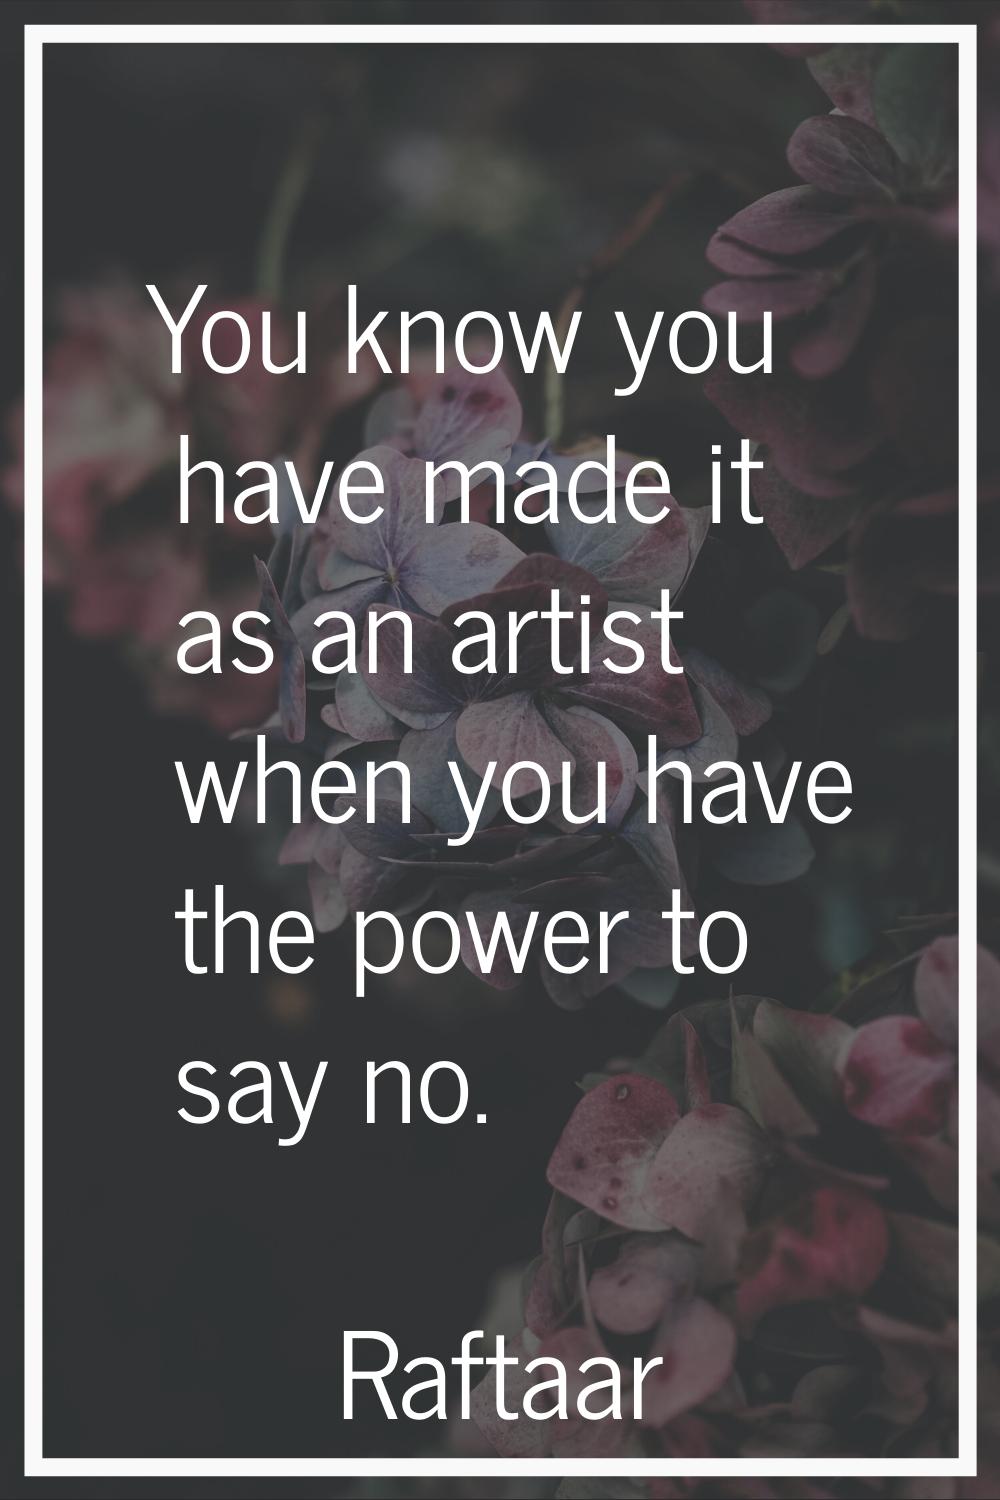 You know you have made it as an artist when you have the power to say no.